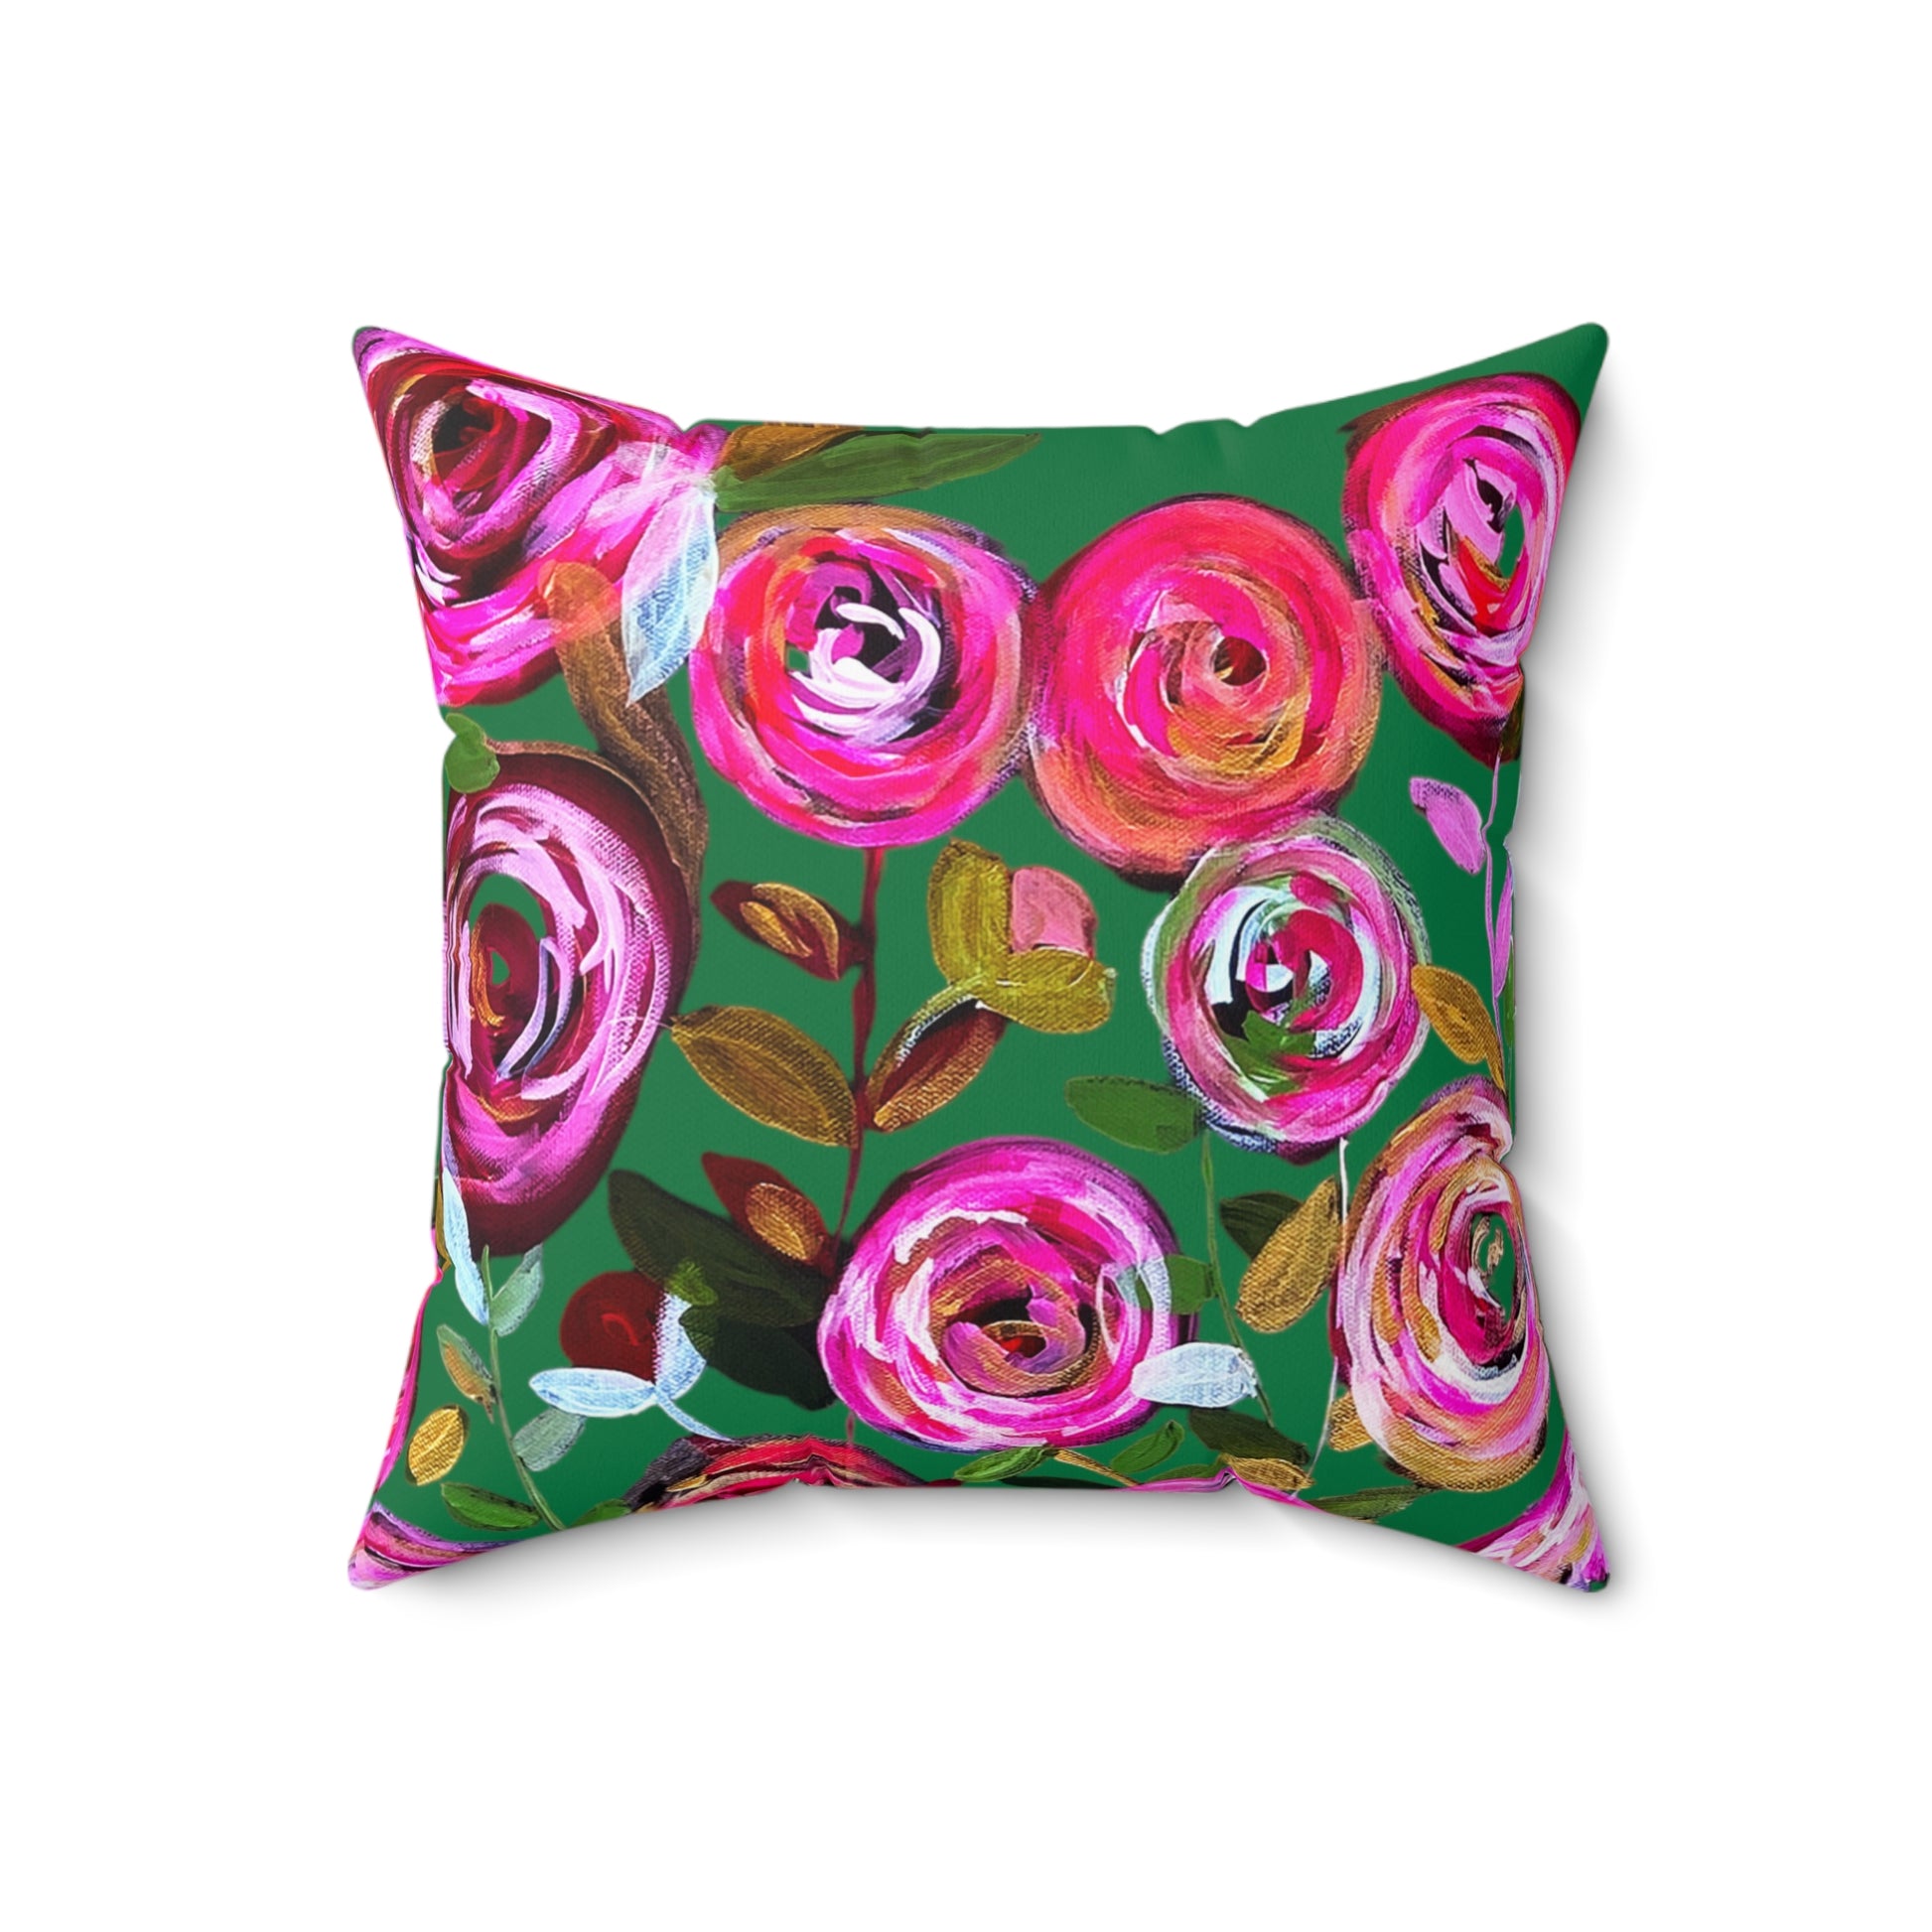 green pink throw toss pillow home decor unique bedroom artisan whimsical